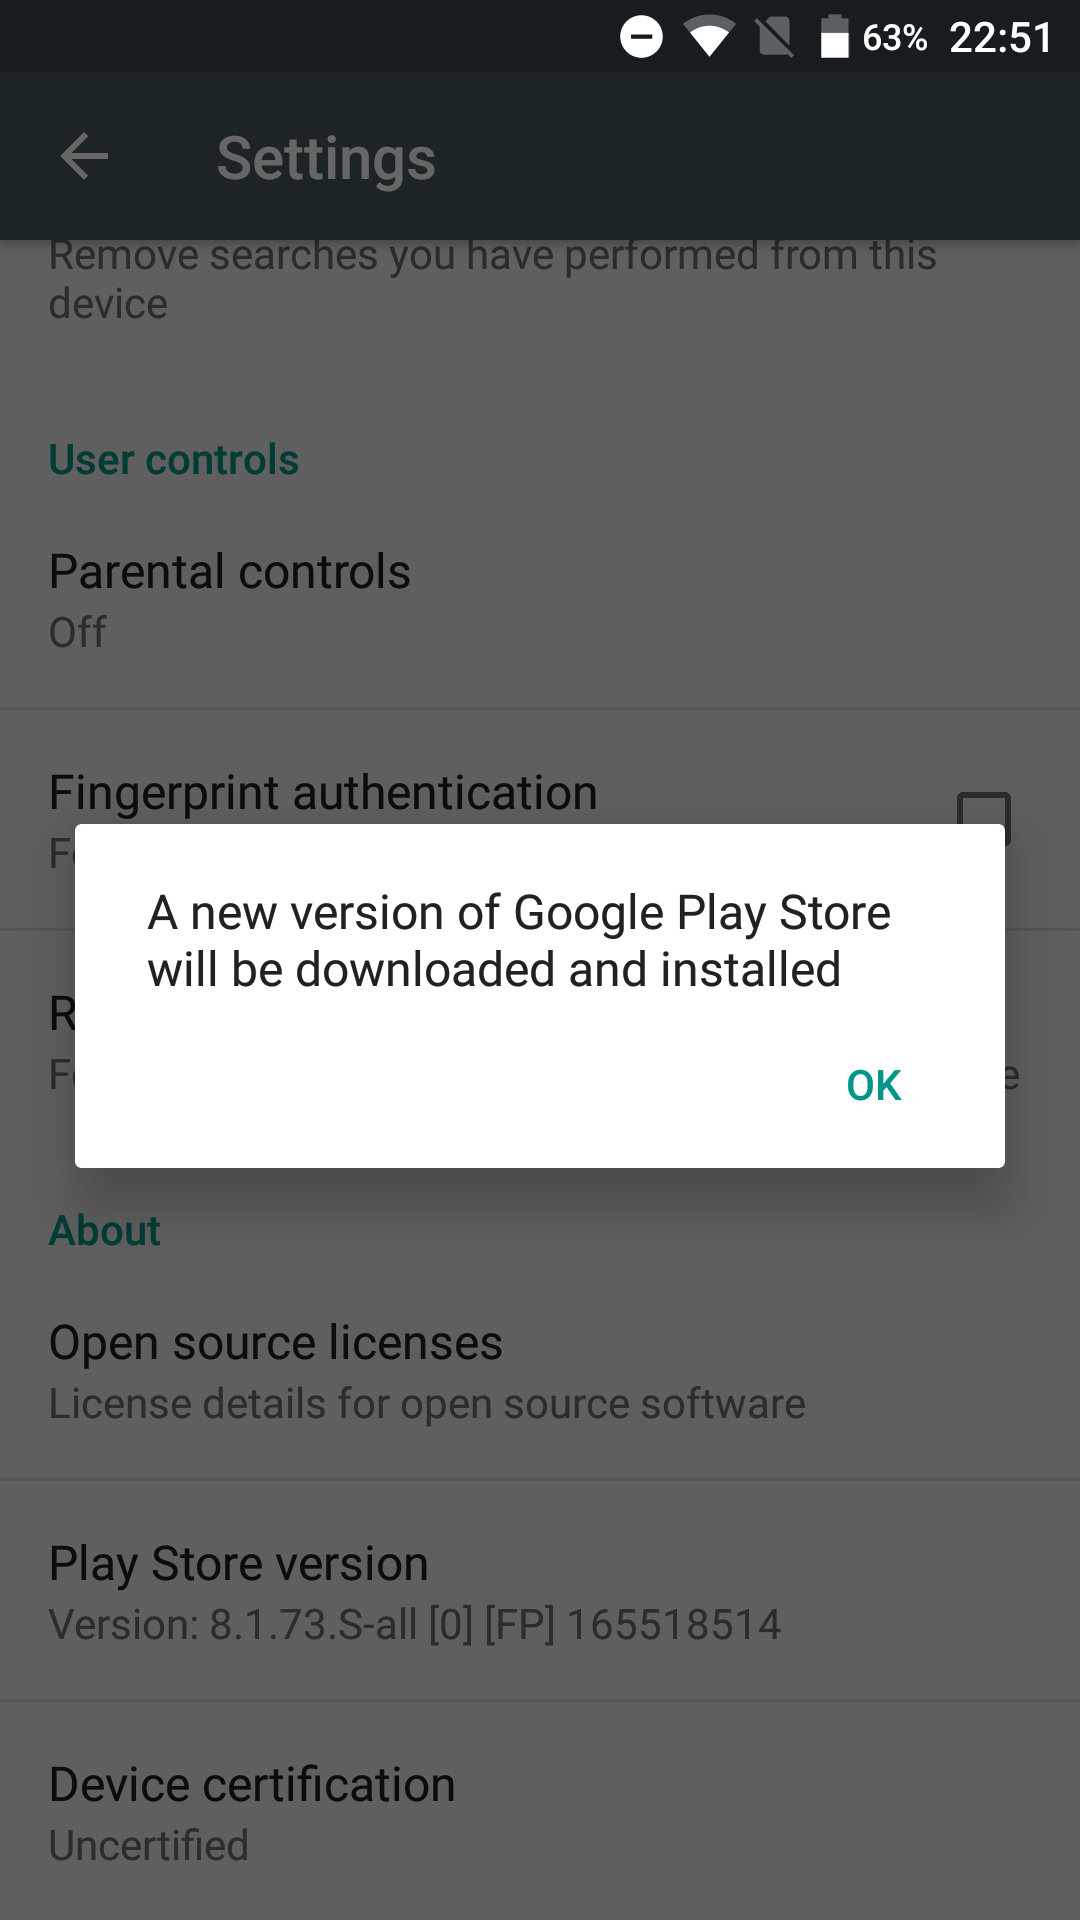 Download The Latest Google Play Store Update Version 8.2.56